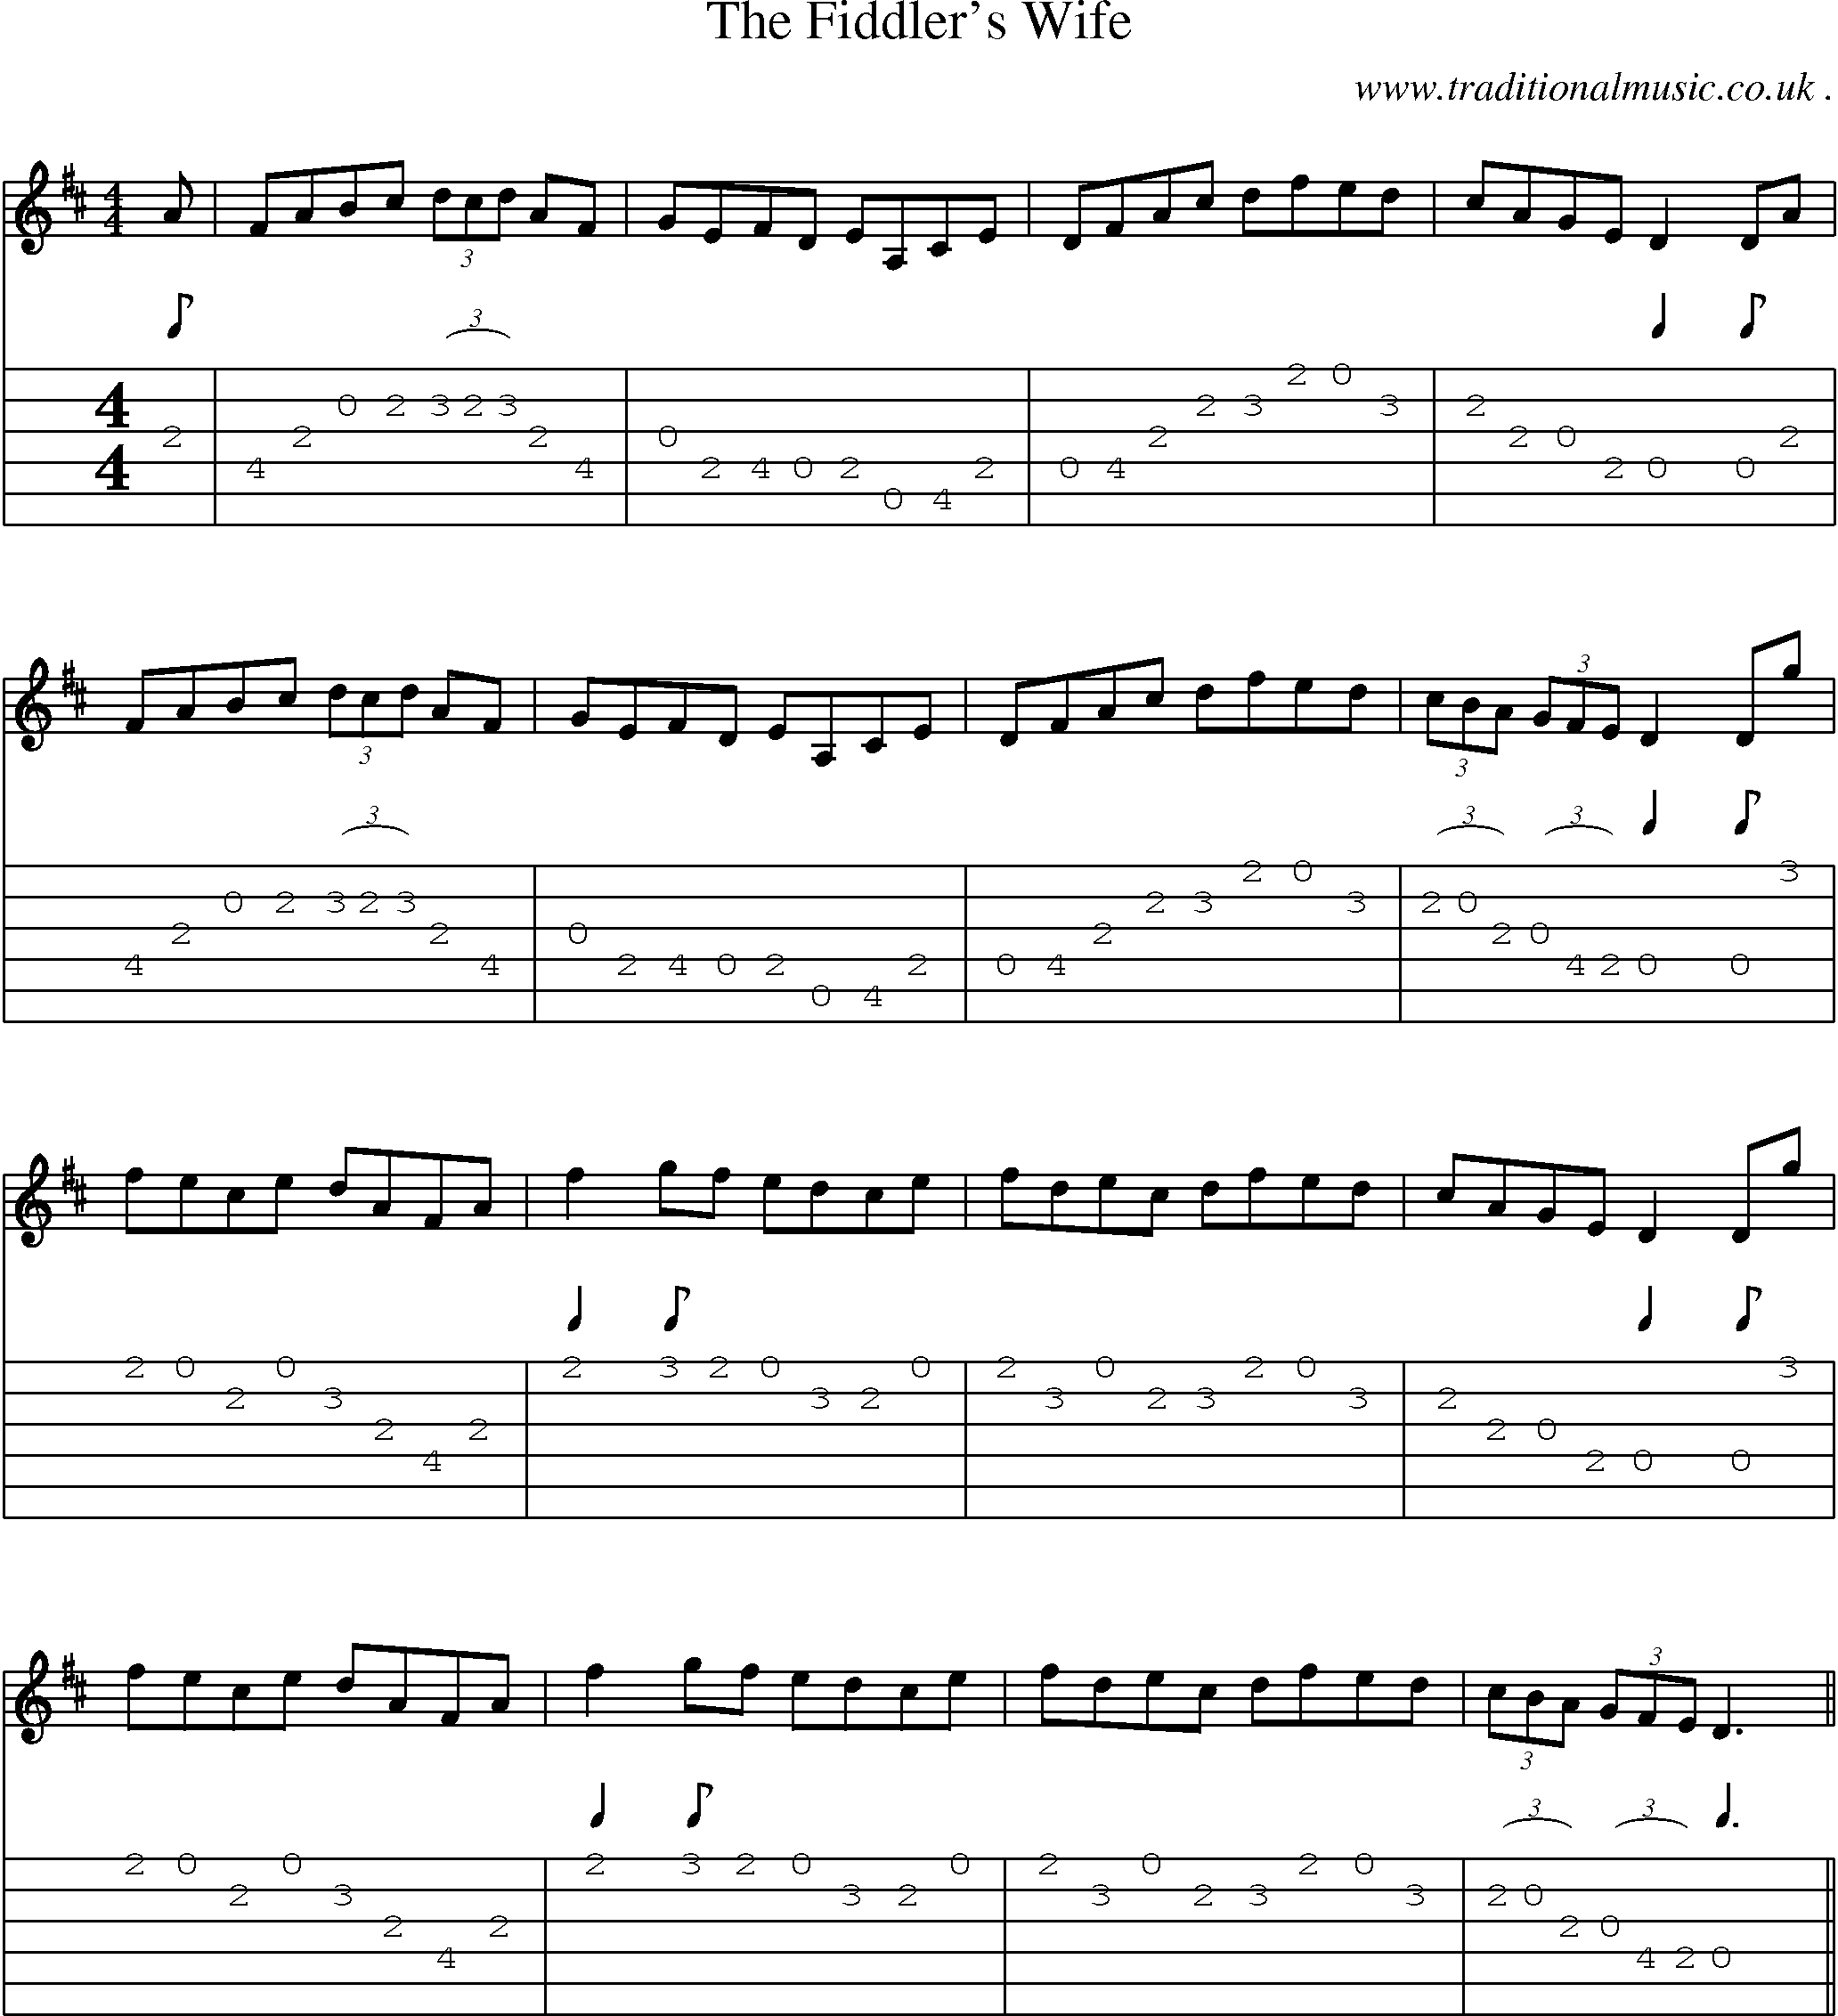 Sheet-Music and Guitar Tabs for The Fiddlers Wife